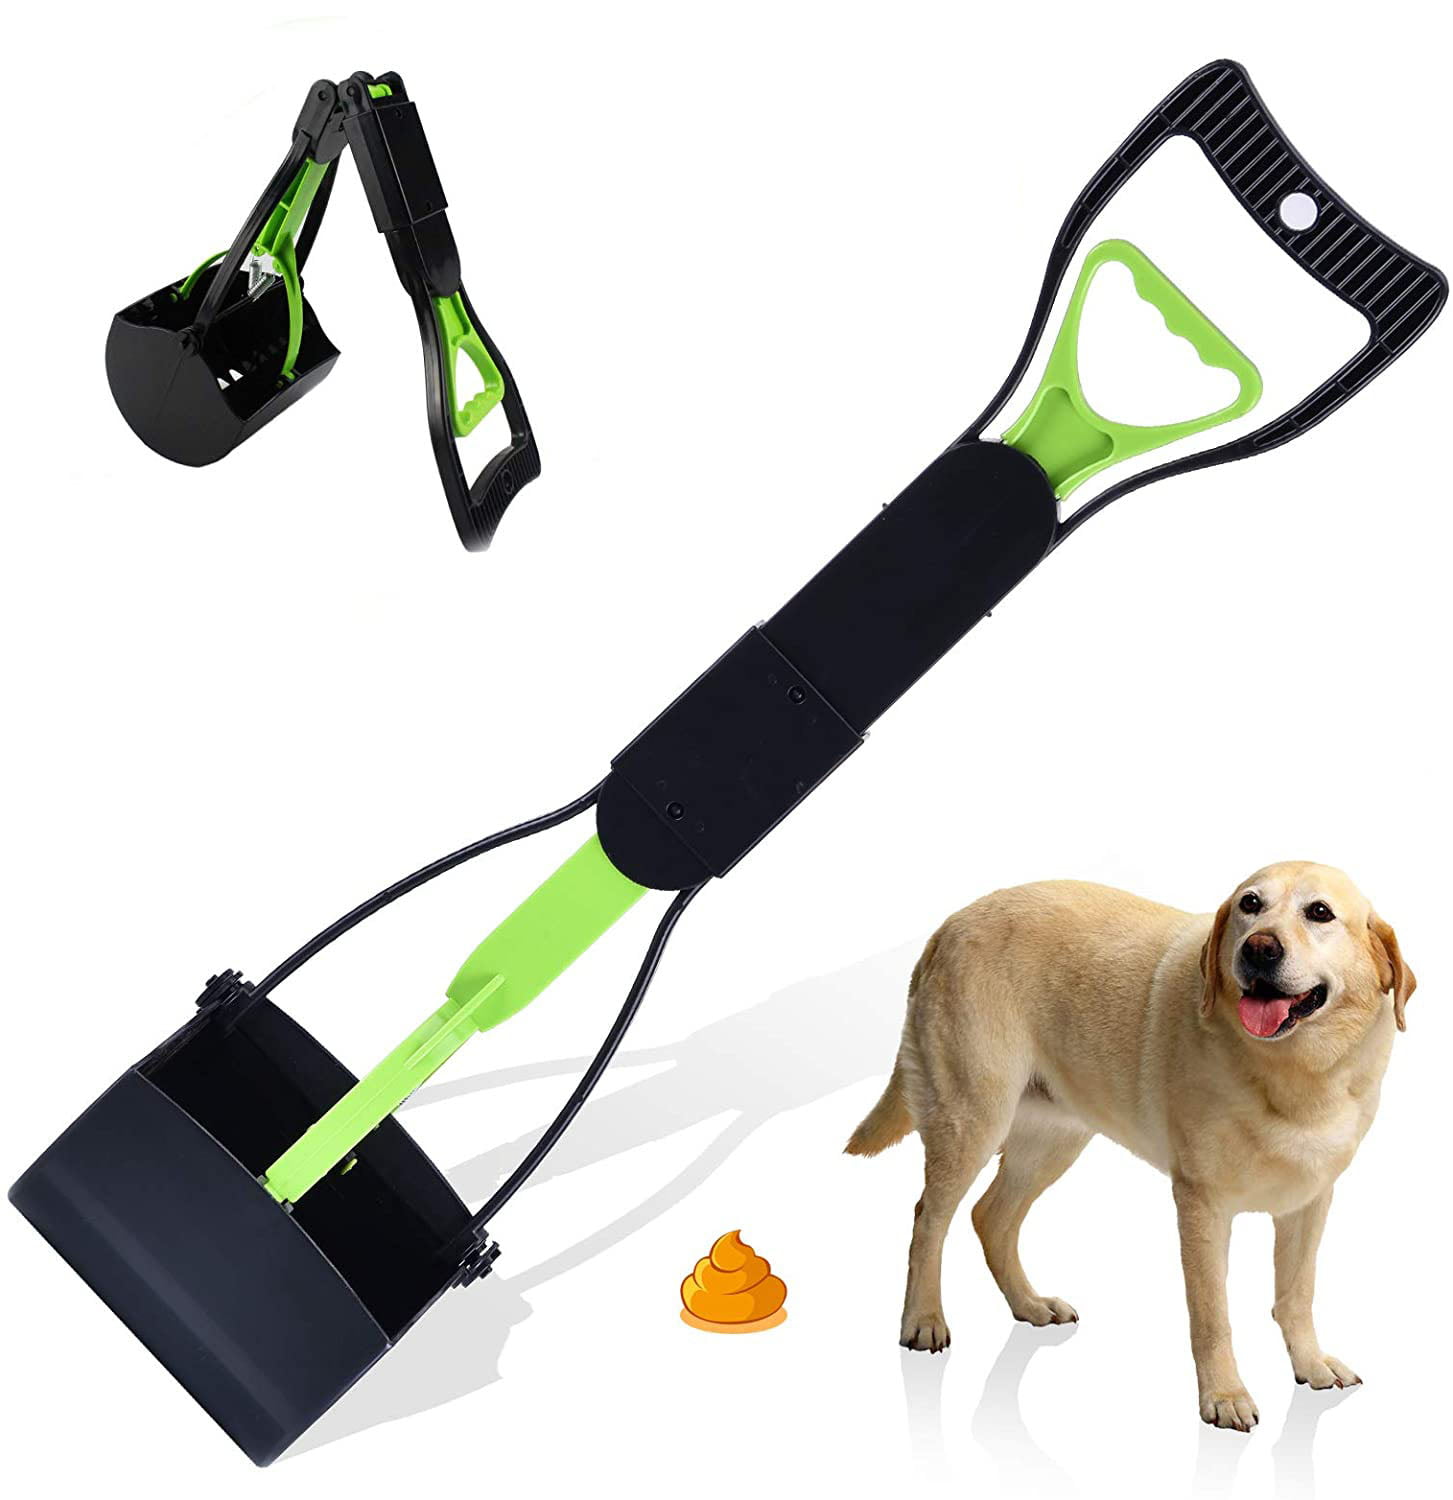 JLDTOP Pet Pooper Scooper for Dog and Cats with Foldable Long Handle High Strength Material and Durable Spring for Easy Grass and Gravel Pick Up 